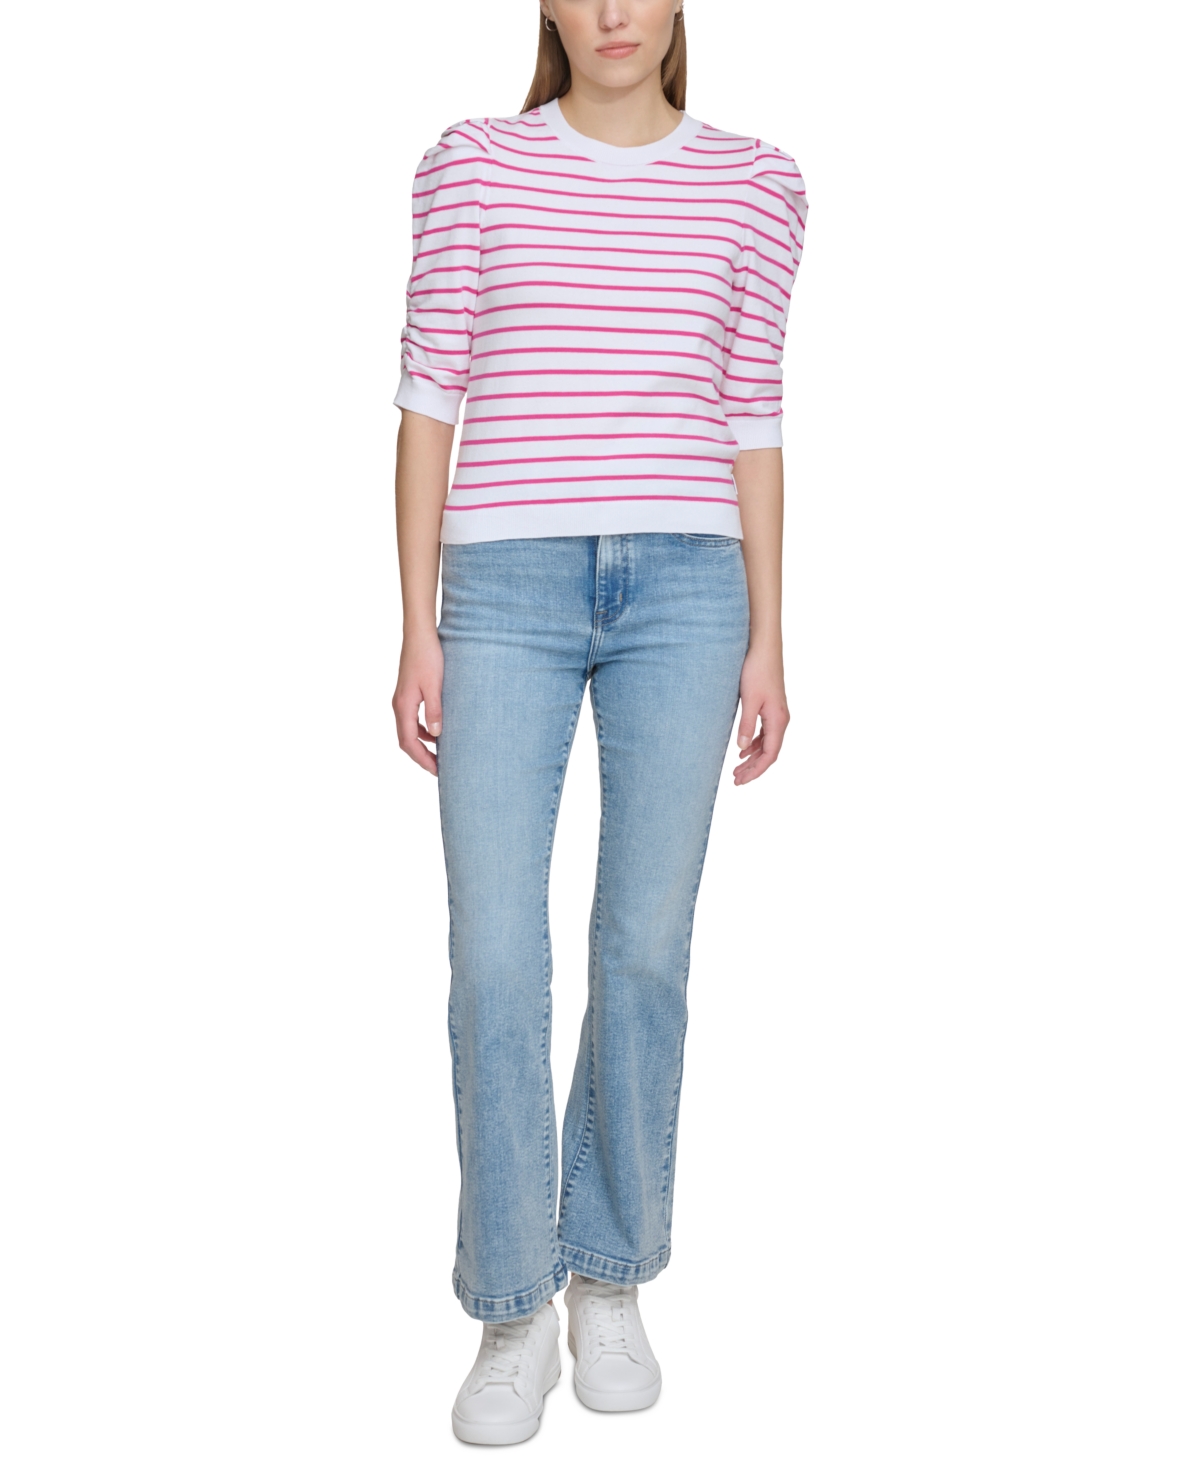 Women's Striped Ruched-Sleeve Crewneck Top - White/Shocking Pink